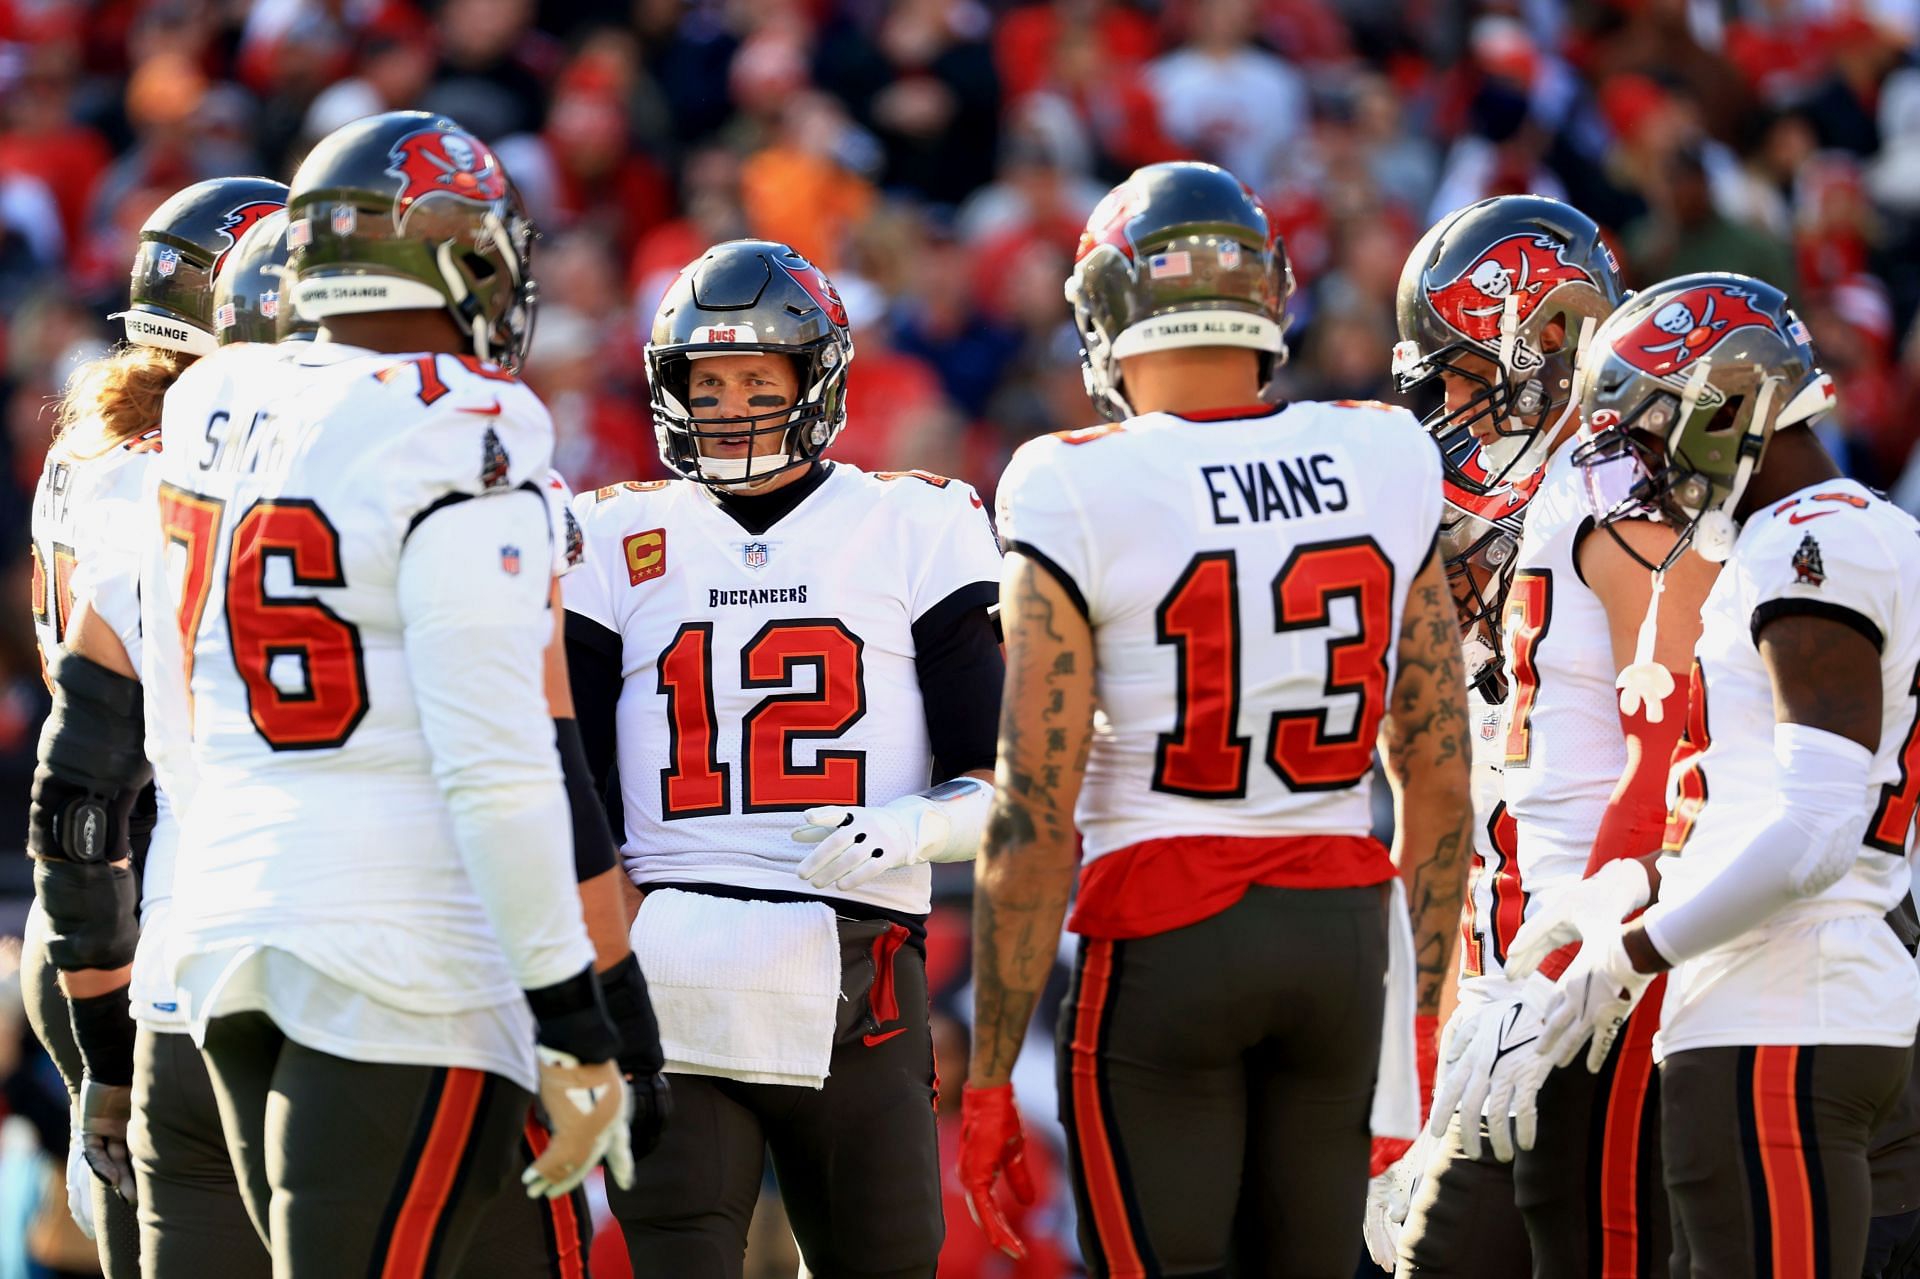 The Buccaneers will remain a top team as long as Tom Brady is there